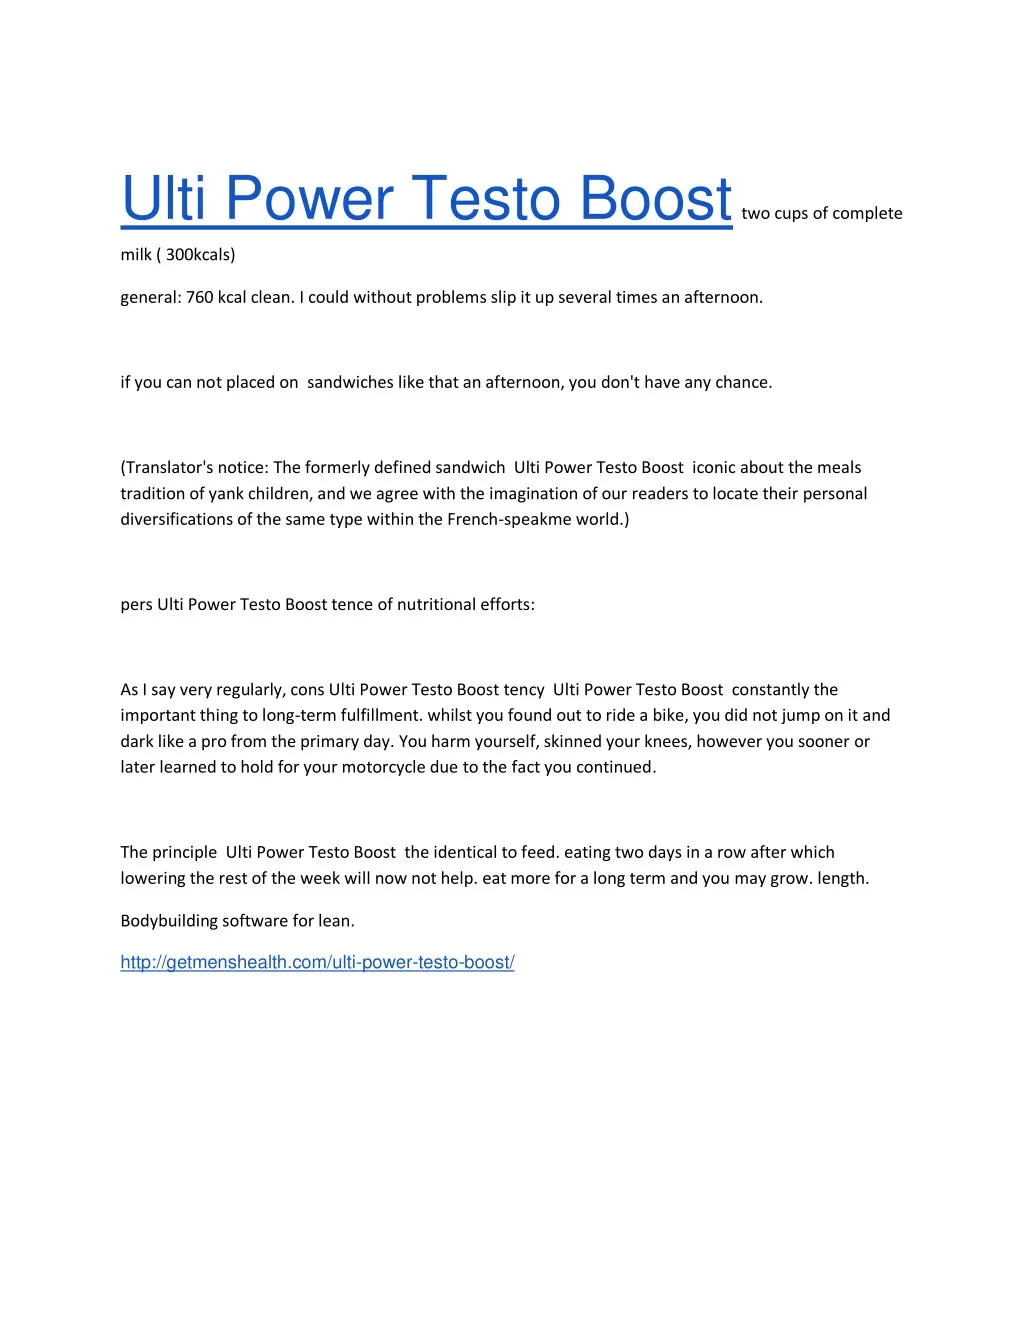 ulti power testo boost two cups of complete n.